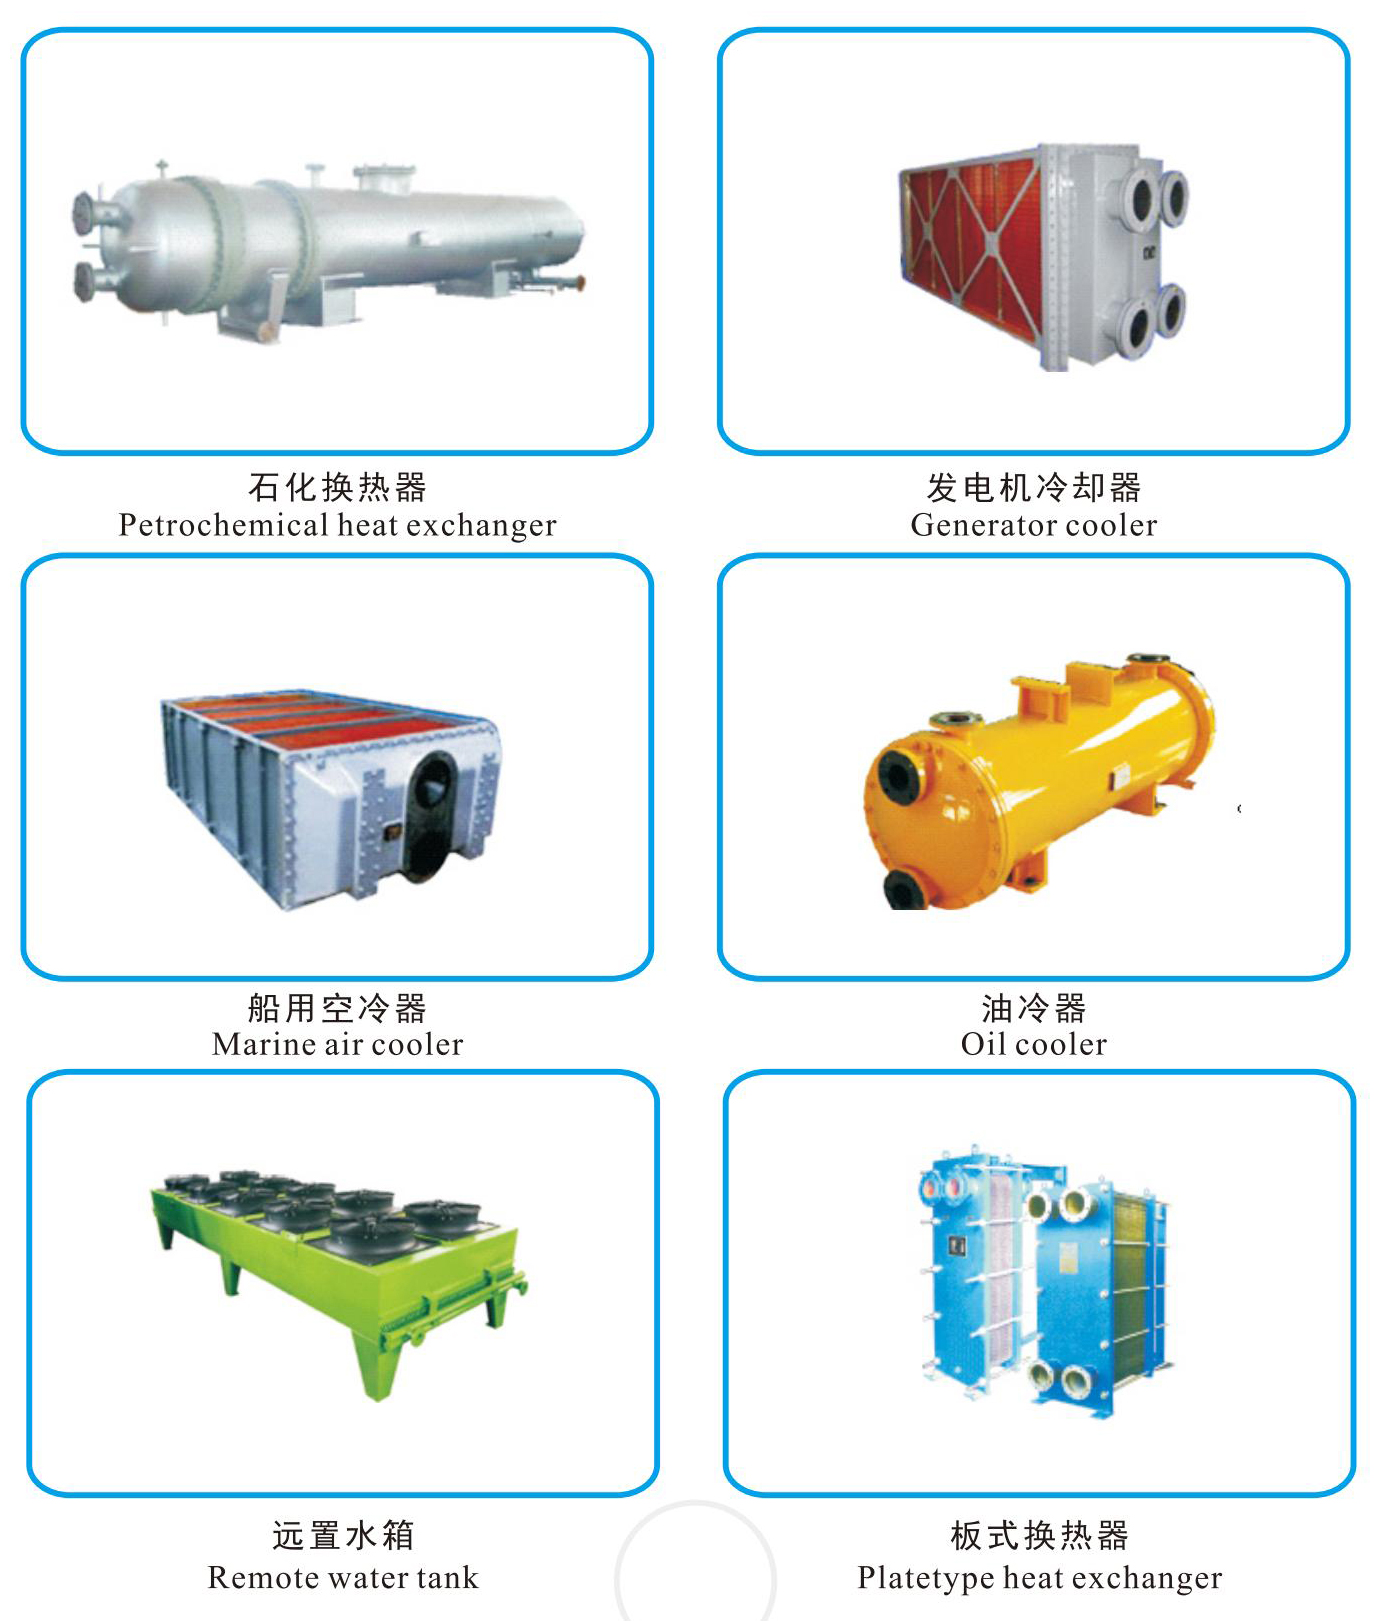 Performance of conventional heat exchanger